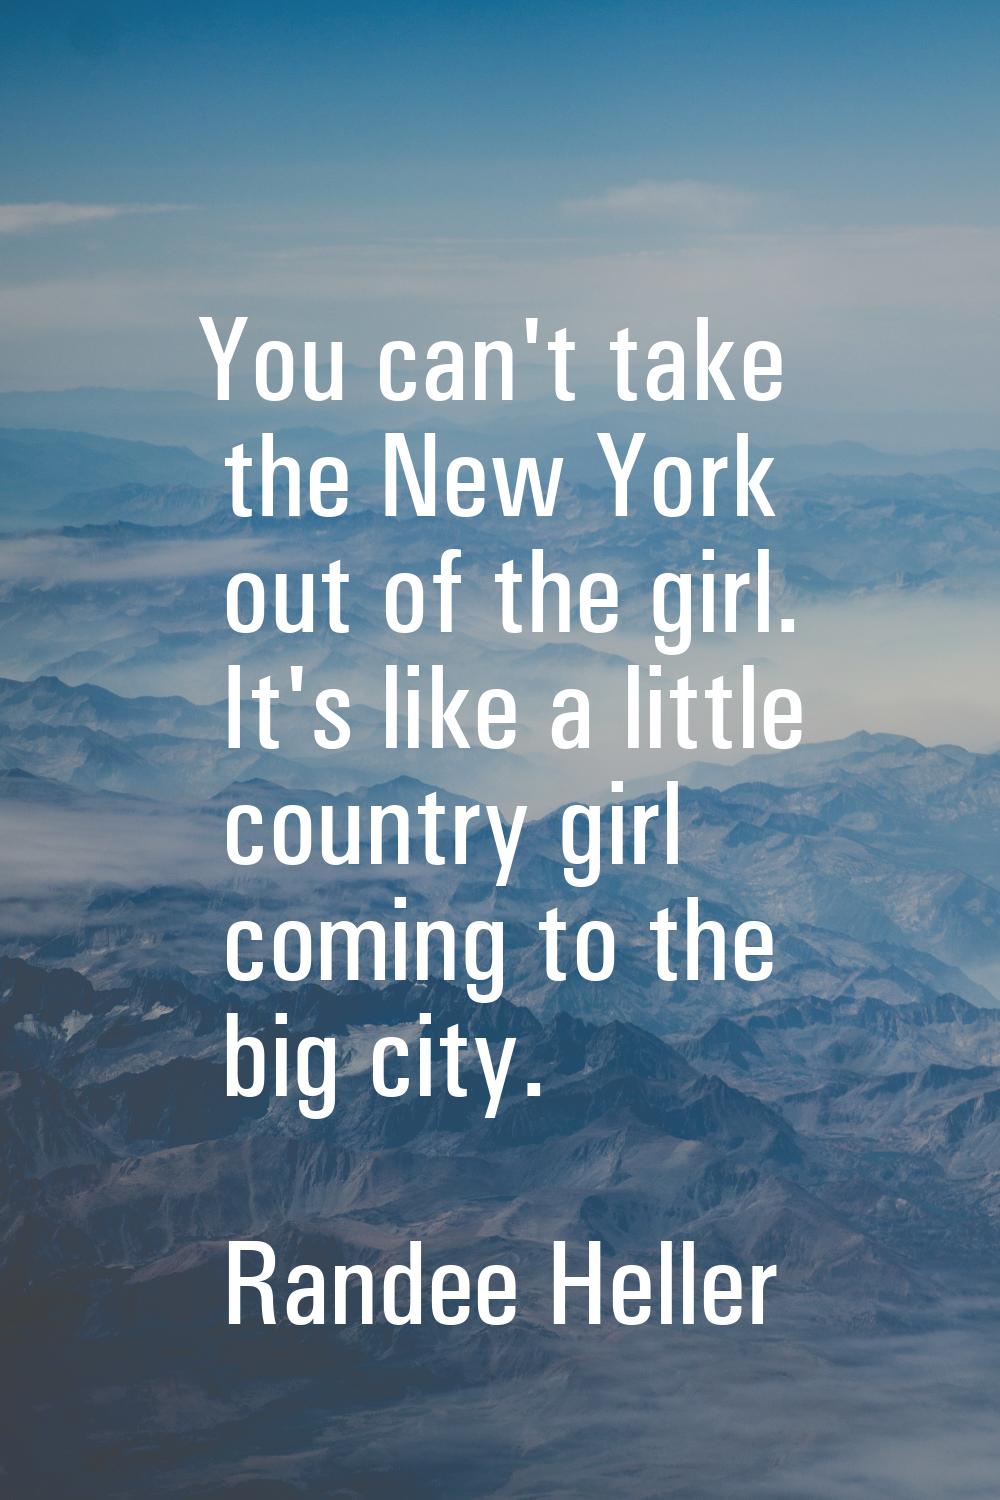 You can't take the New York out of the girl. It's like a little country girl coming to the big city